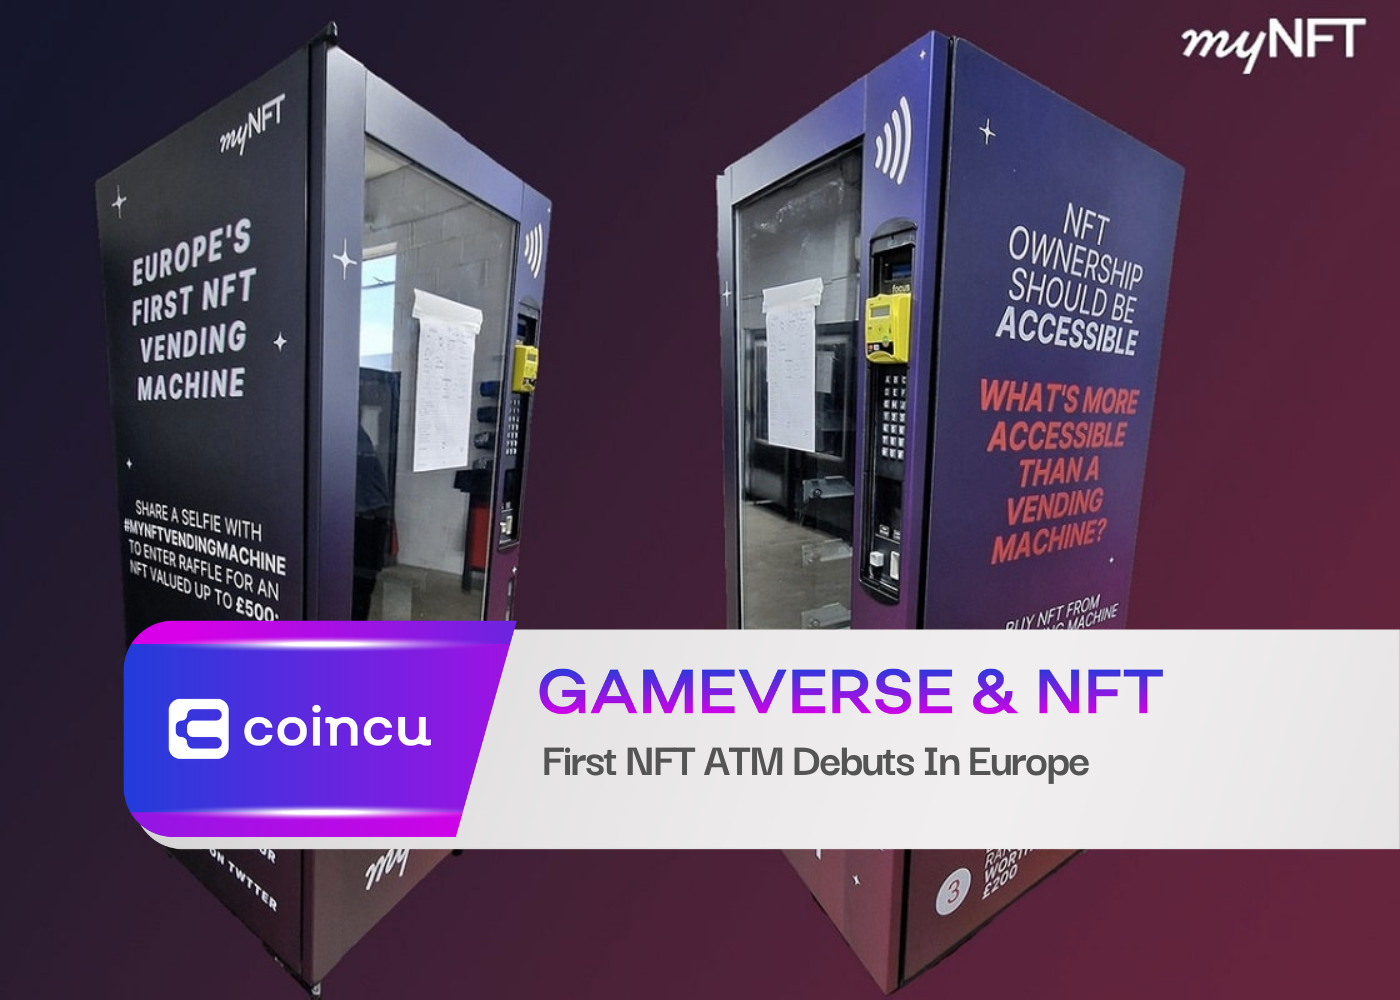 First NFT ATM Debuts In Europe